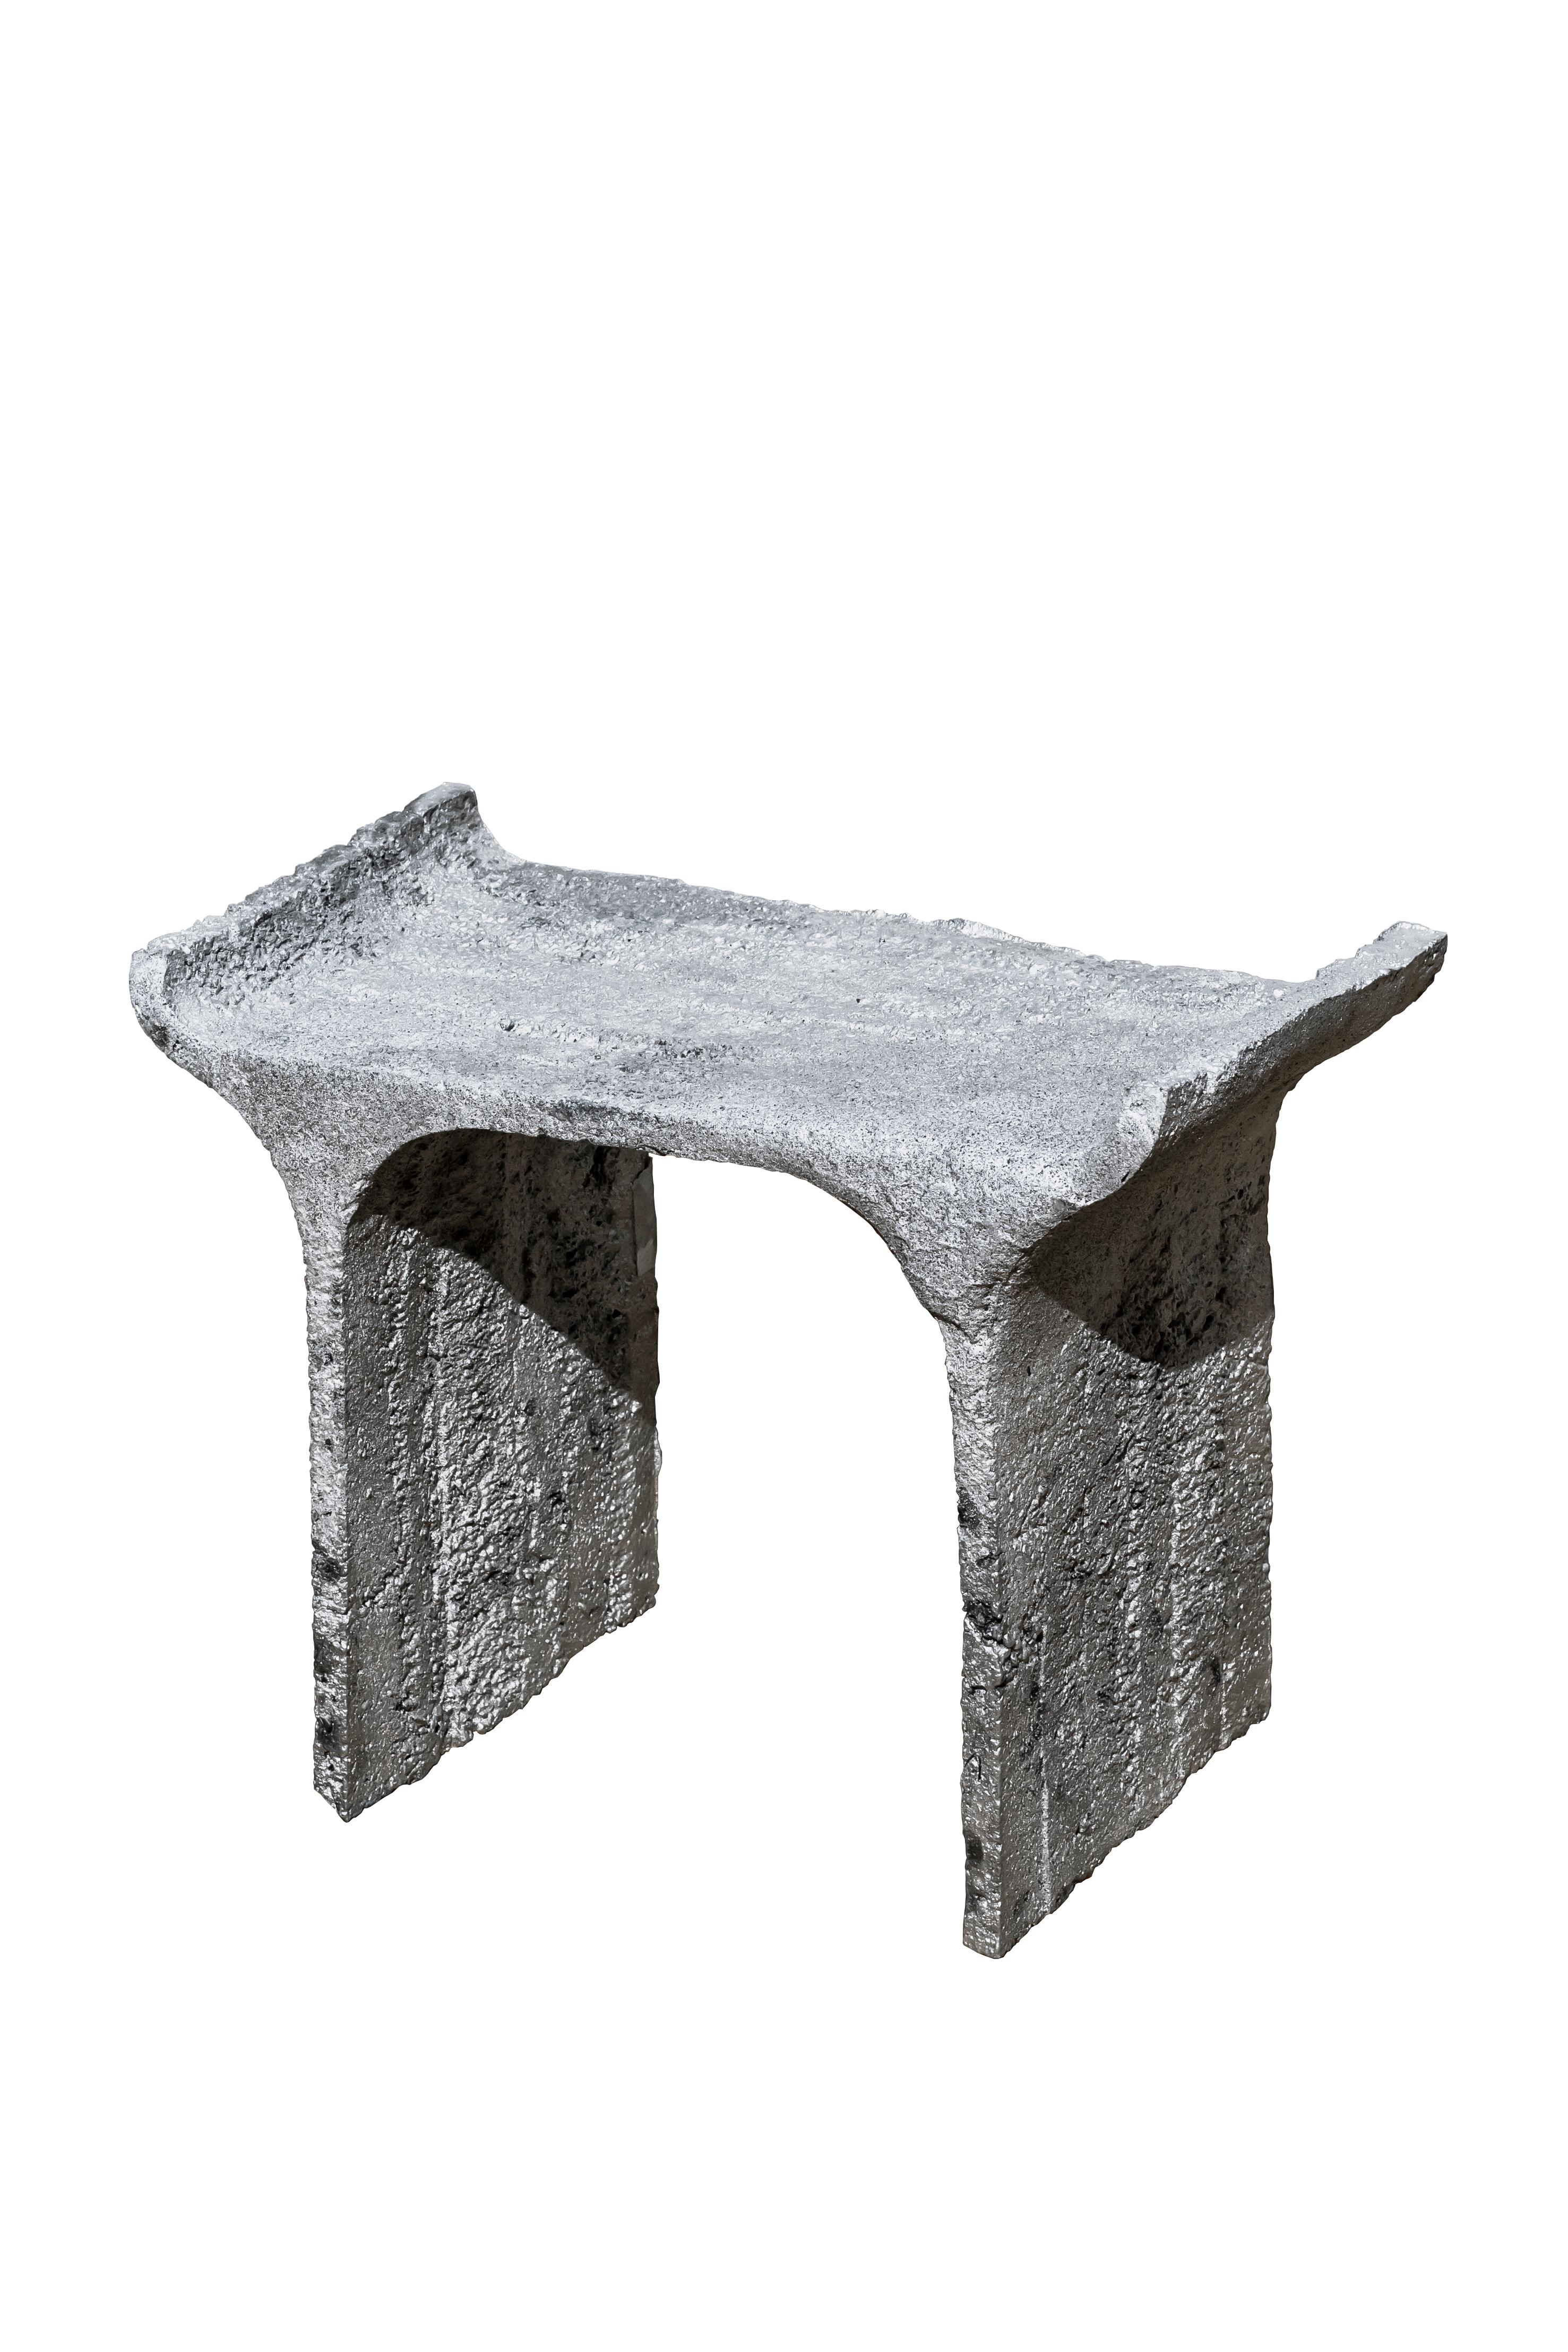 Tori stool by Ries
Dimensions: W 60 x D 44 x H 86 cm 
Materials: Sand cast aluminum

Also available: Tori stool travertine

Ries is a design studio based in Buenos Aires, Argentina, focused on product and conemporary furniture design. The